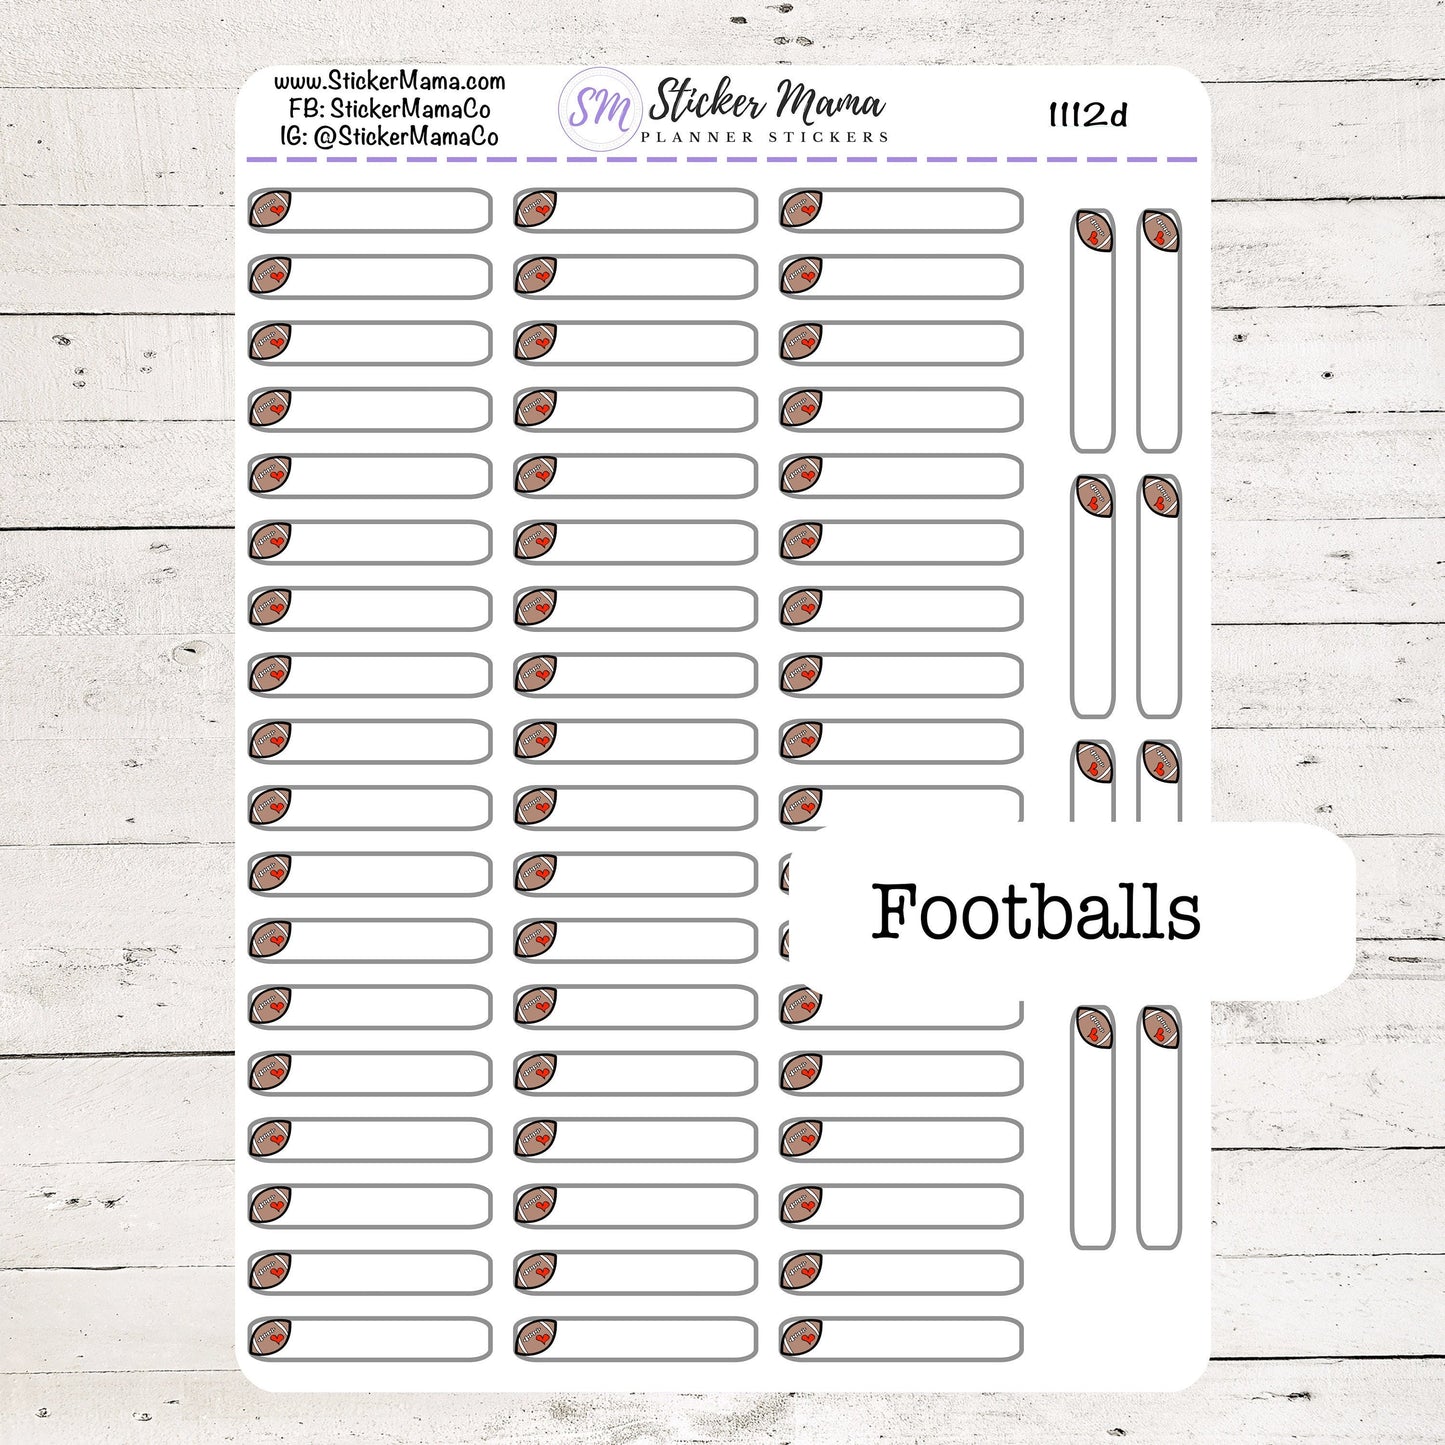 1112d - DOODLE FOOTBALL PLANNER Labels Stickers  - Football Stickers - Football Games - Football Practice